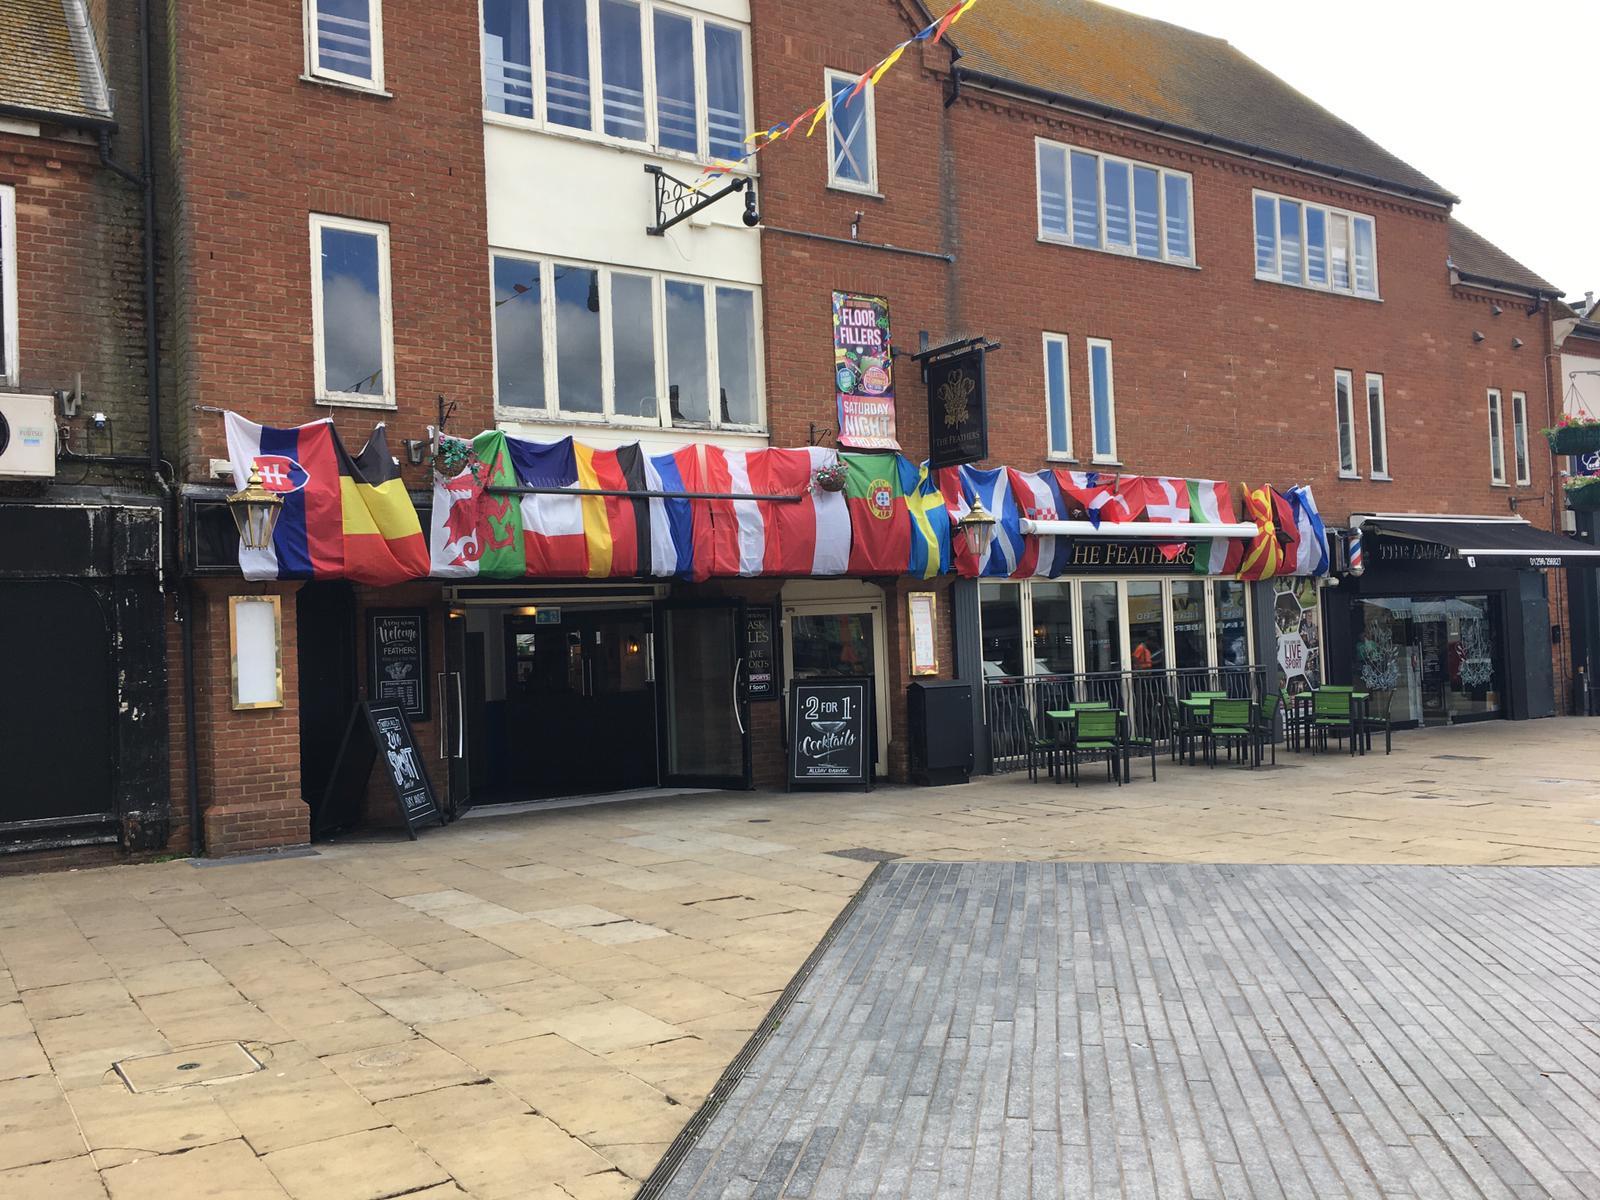 The Feathers Pub in Kingsbury Square, Aylesbury, is representing all the nations 